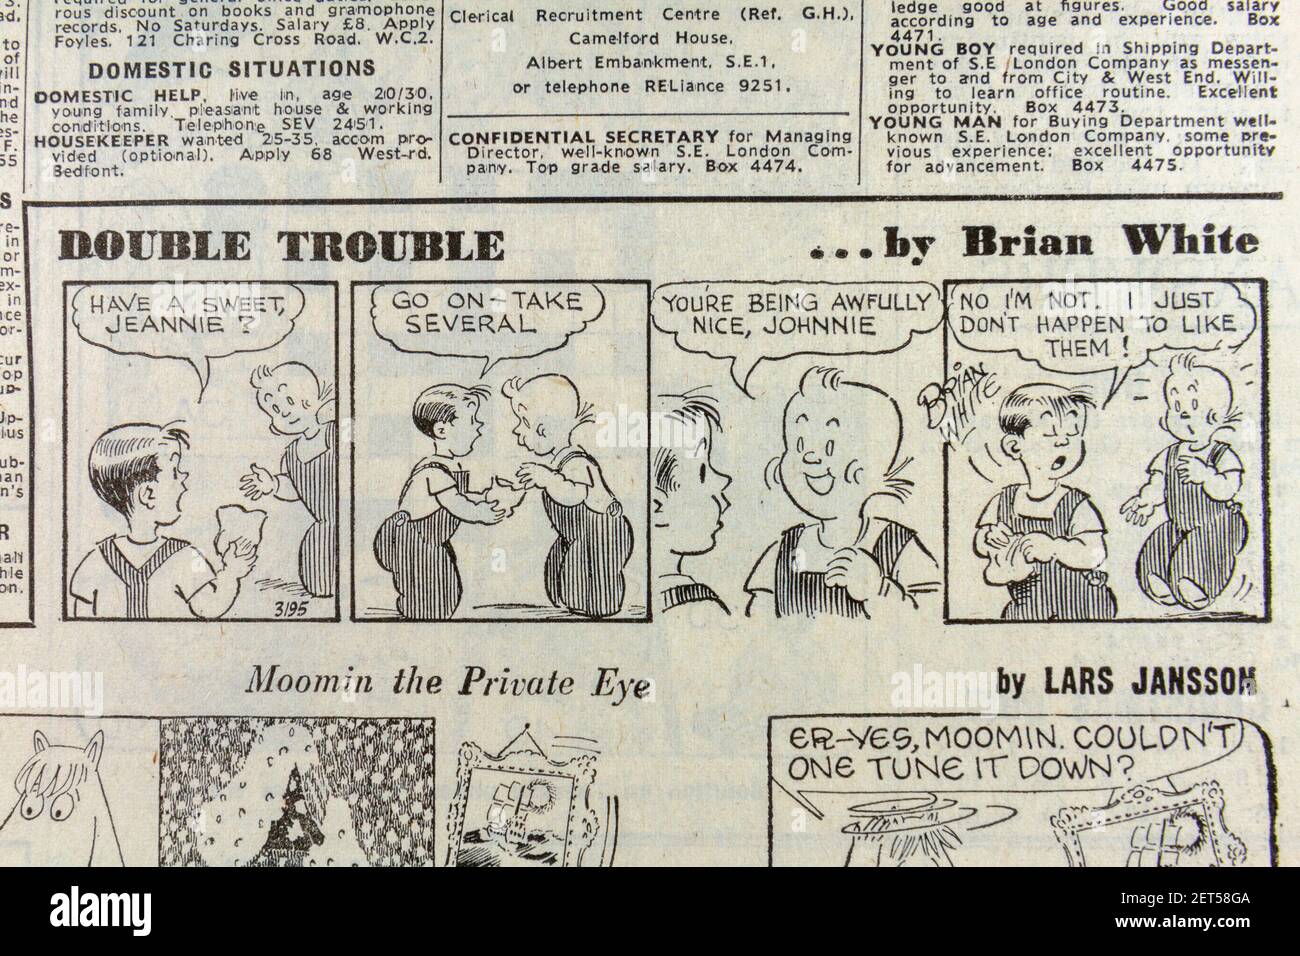 'Double Trouble' comic strip by Brian White in the Evening News newspaper (Friday 24th December 1965), London, UK. Stock Photo